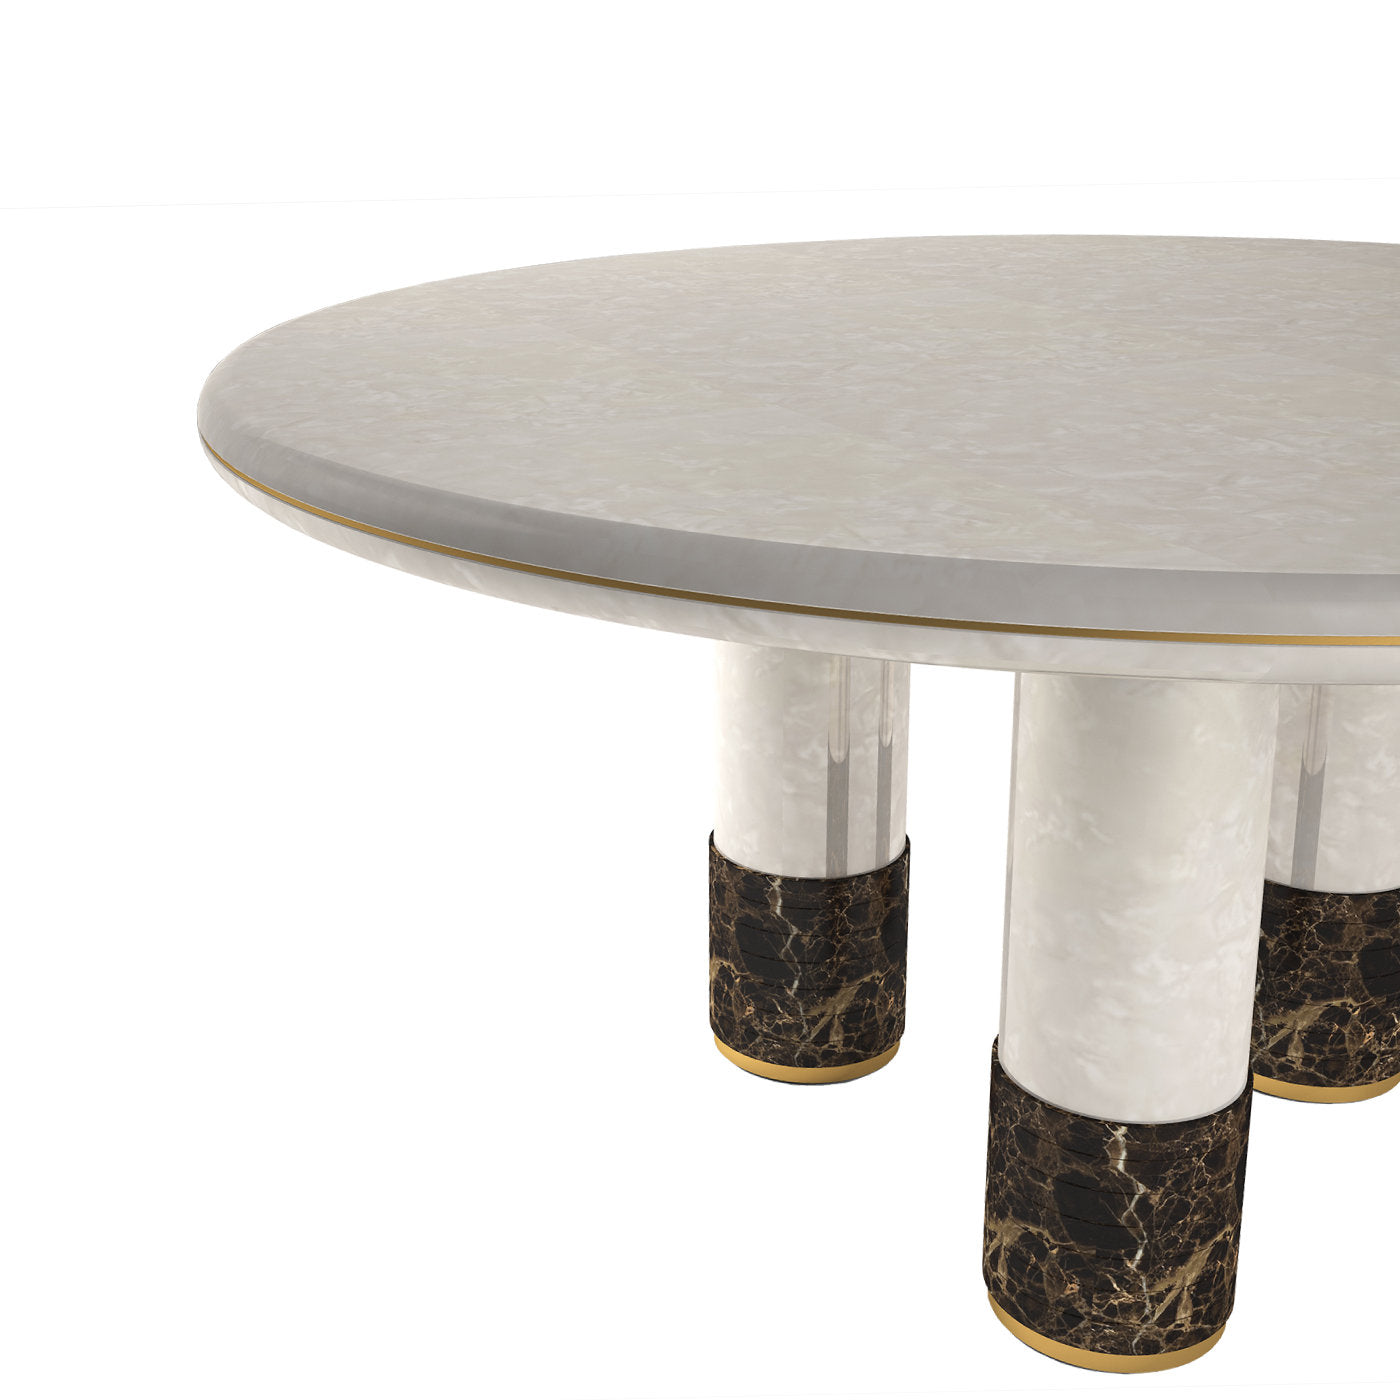 Venice Round Dining Table by Valerio Andriani - Alternative view 1